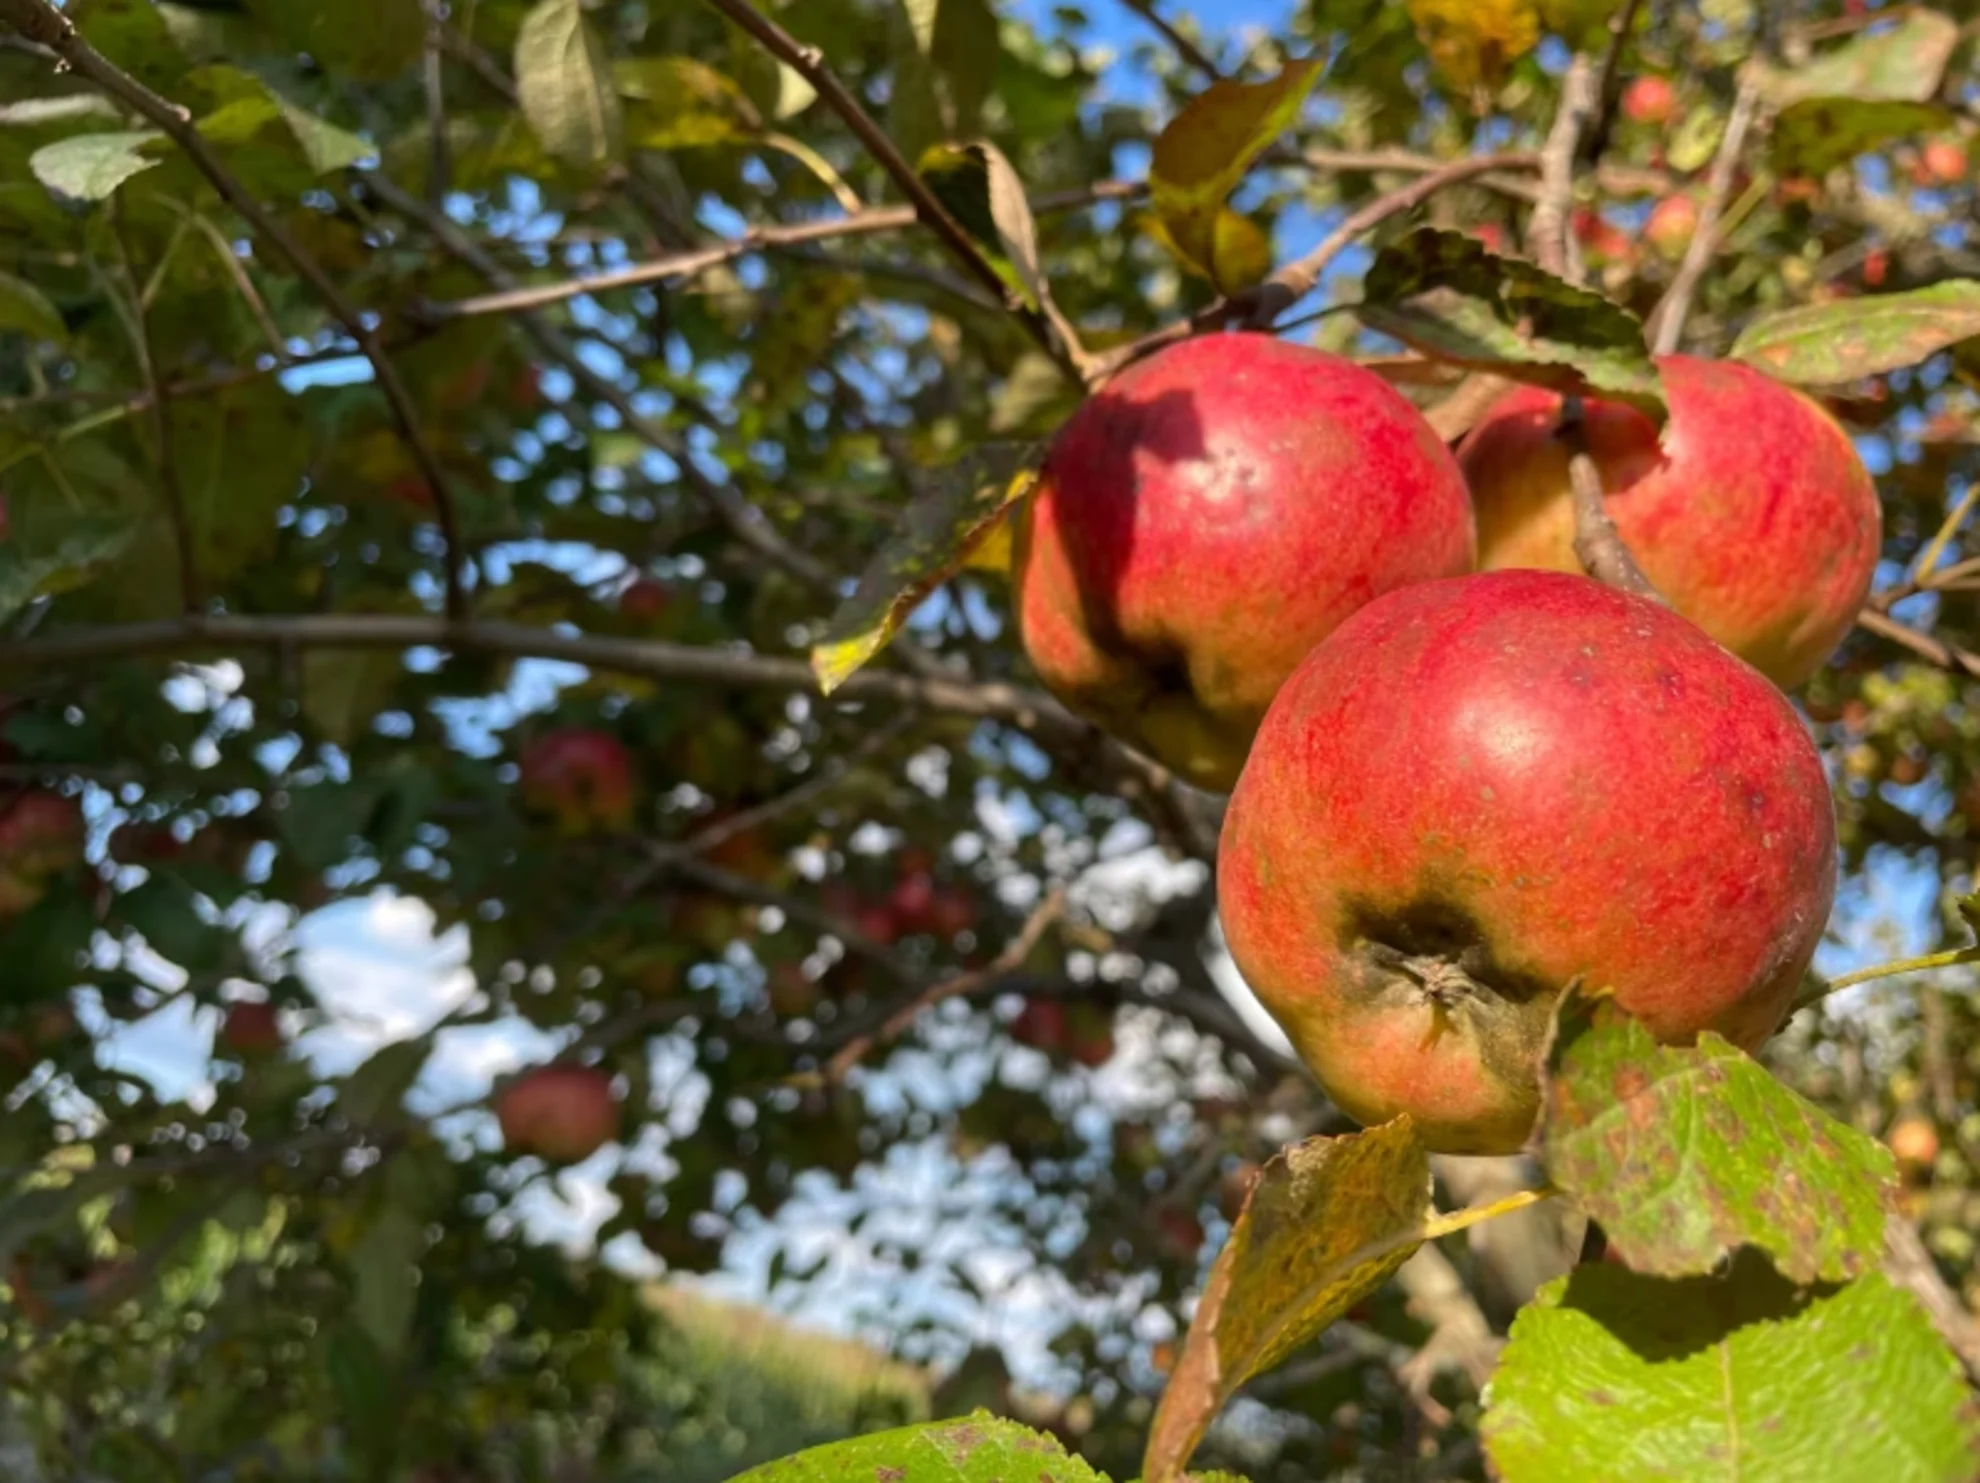 May frost puts chill on apple-picking season